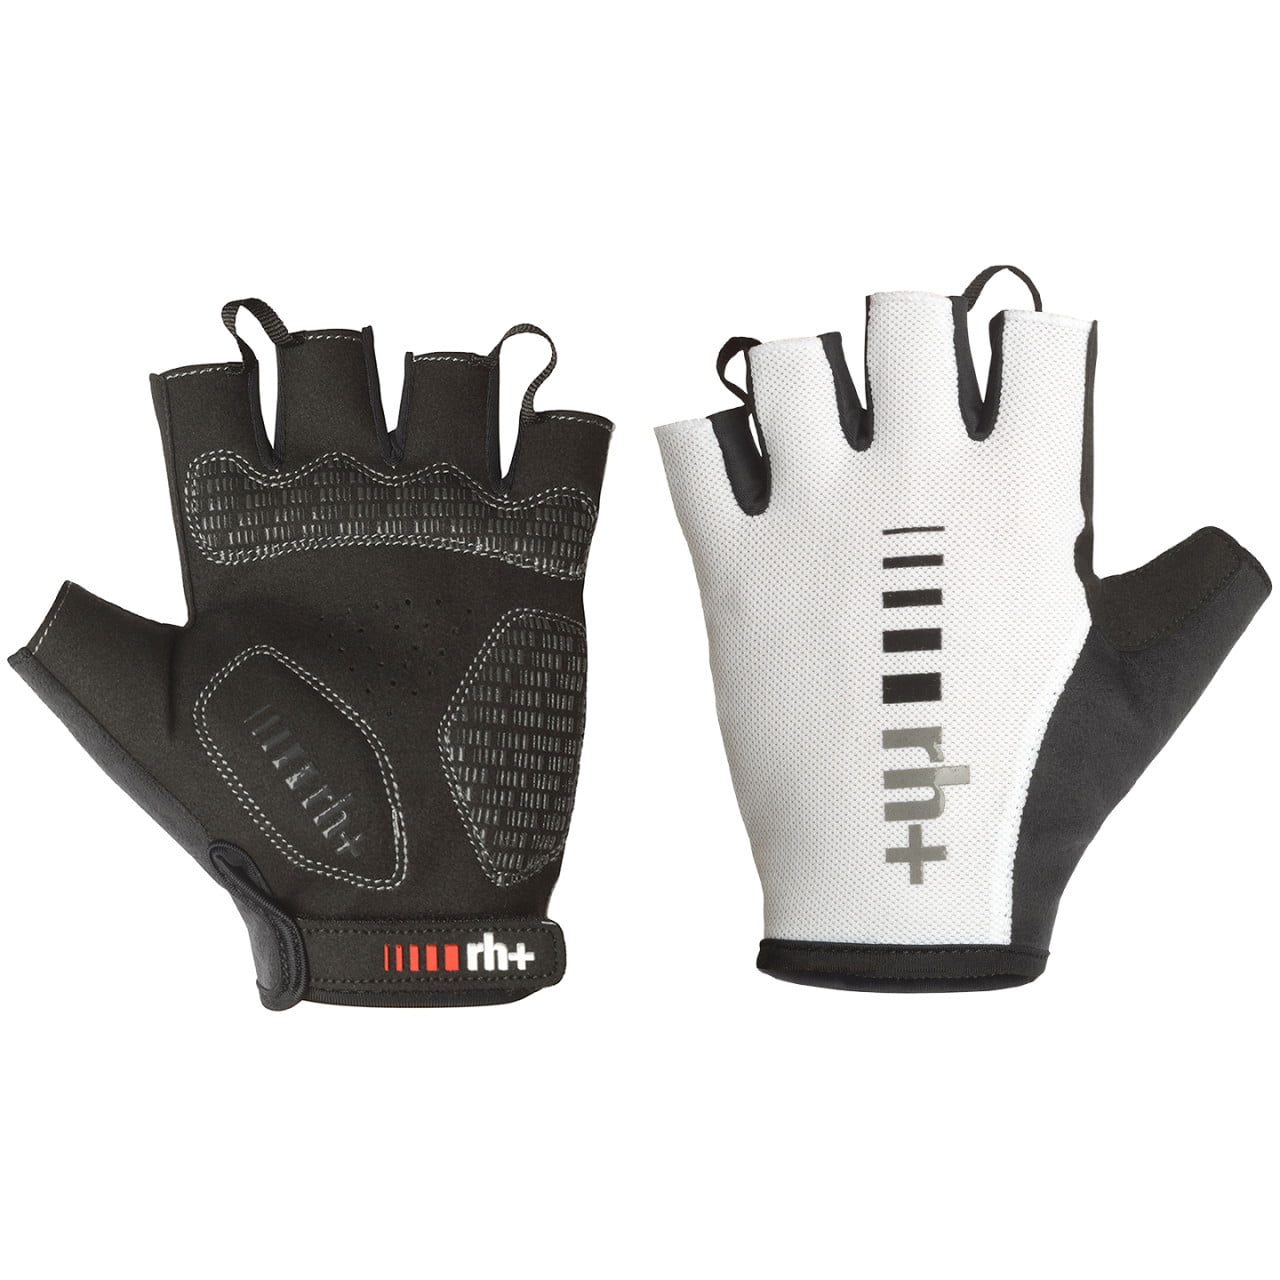 rh+ New Code Cycling Gloves